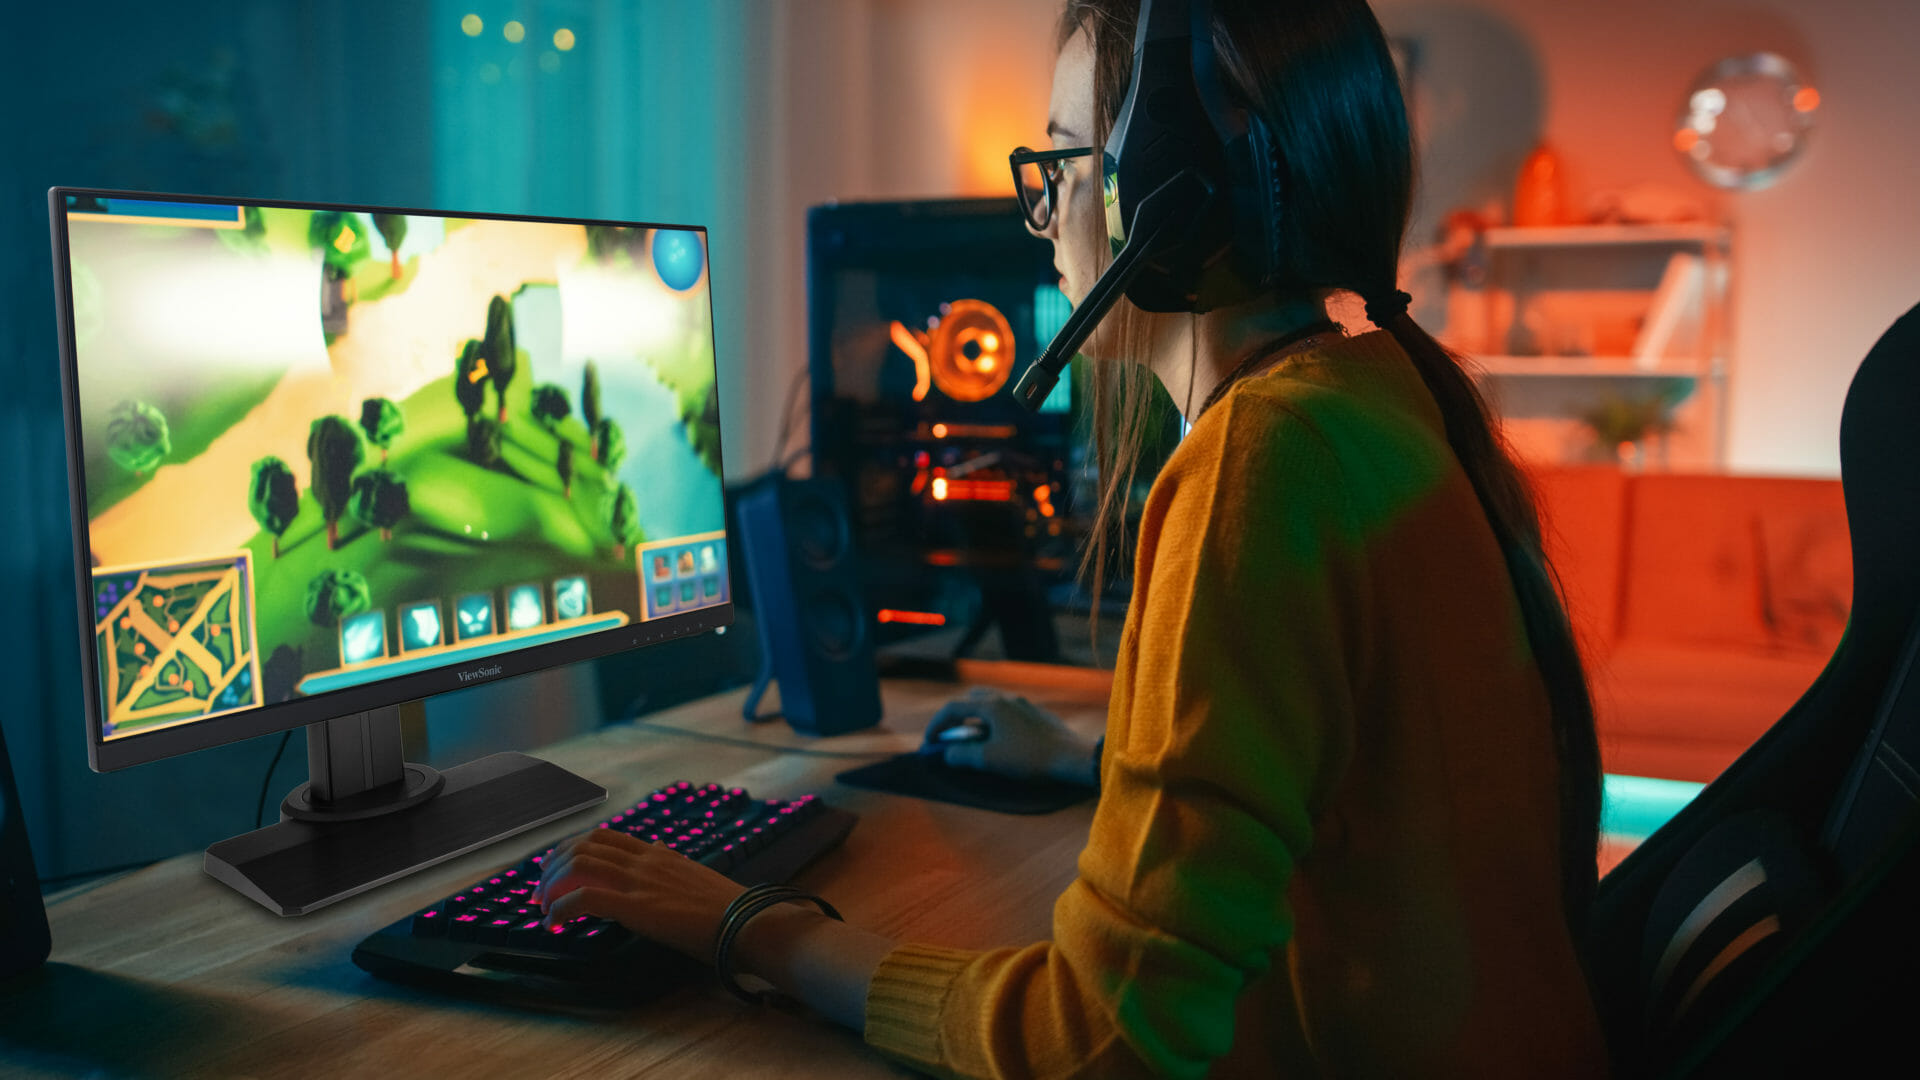 A girl playing a game on a ViewSonic monitor